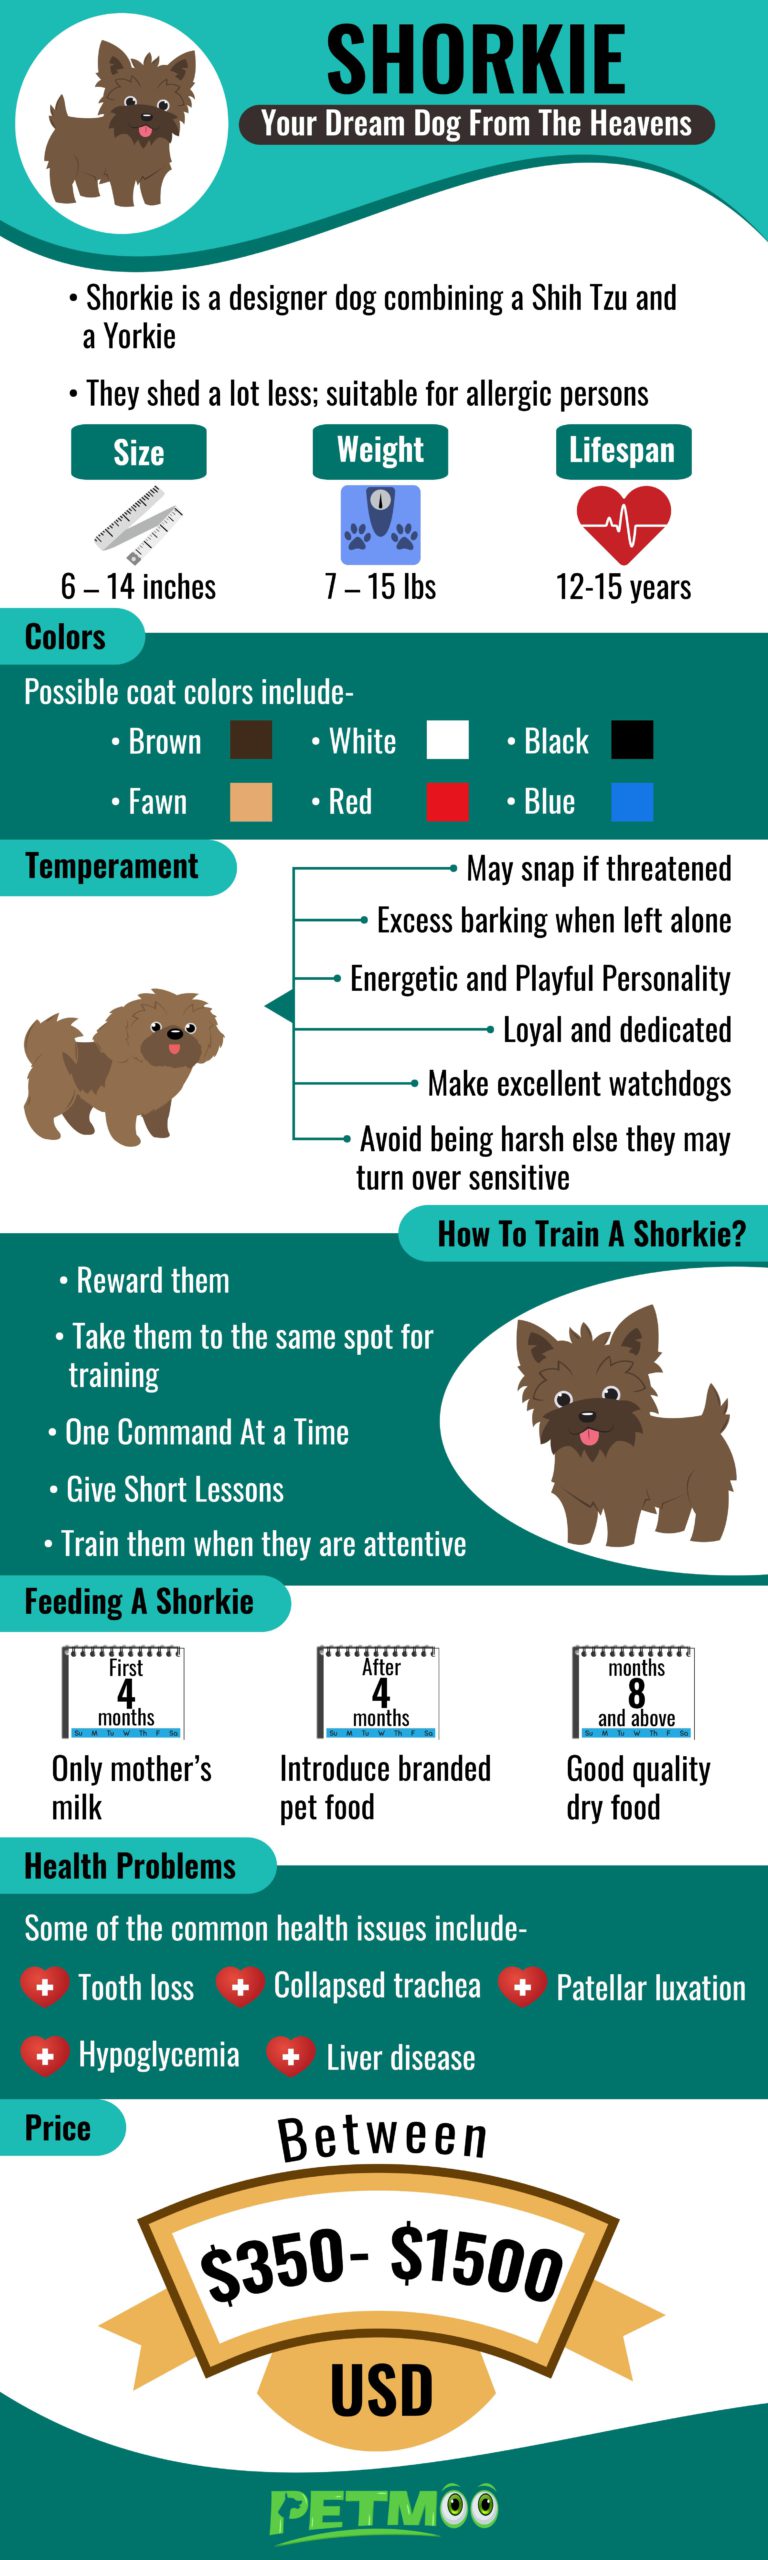 Shorkie Infographic